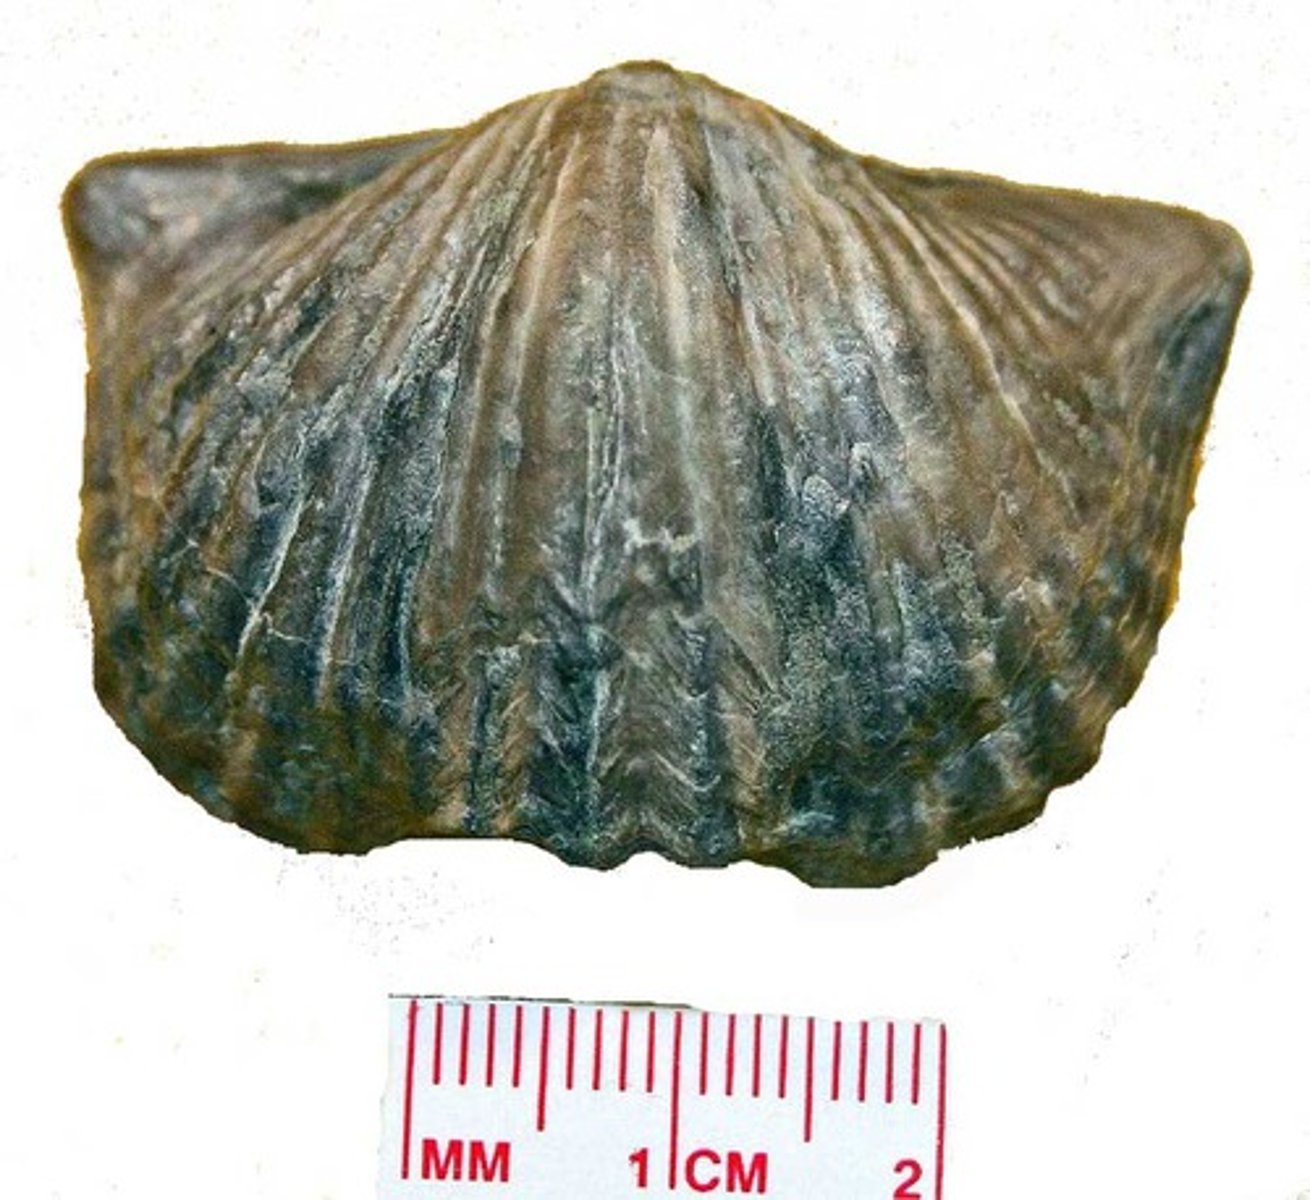 <p>Articulate brachiopod genus</p><p>an extinct genus of brachiopods that lived from the Ordovician to the Silurian in Asia, Europe, North America, and South America. It has a prominent sulcus and fold. It usually lived in marine lime mud and sands.</p>